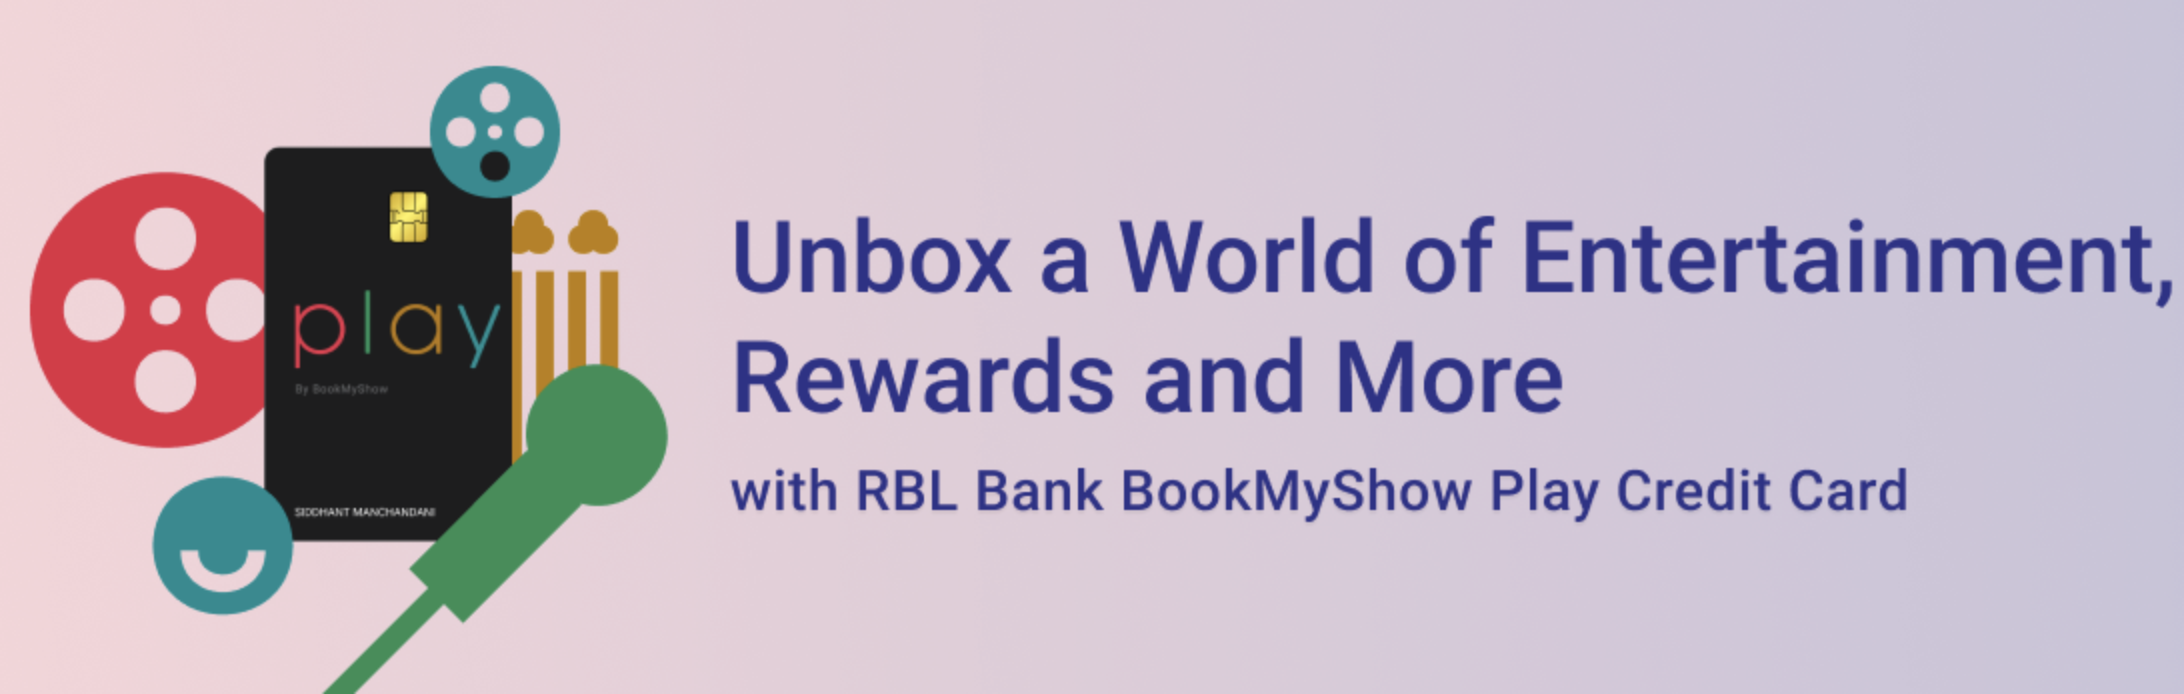 BookMyShow RBL Bank PLAY Credit Card to Launch